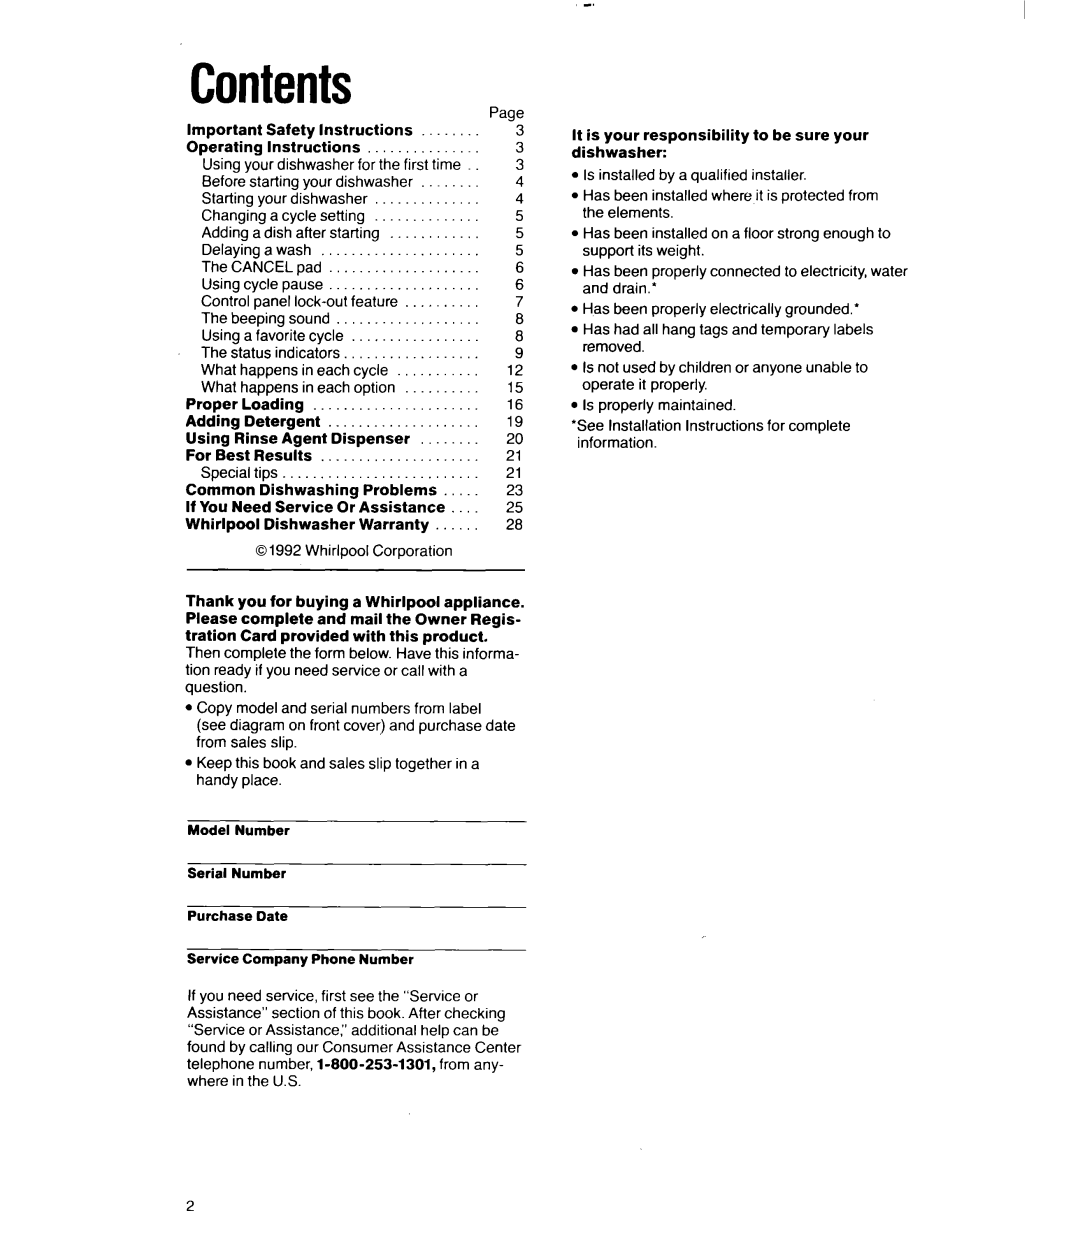 Whirlpool 9700 manual Contents 